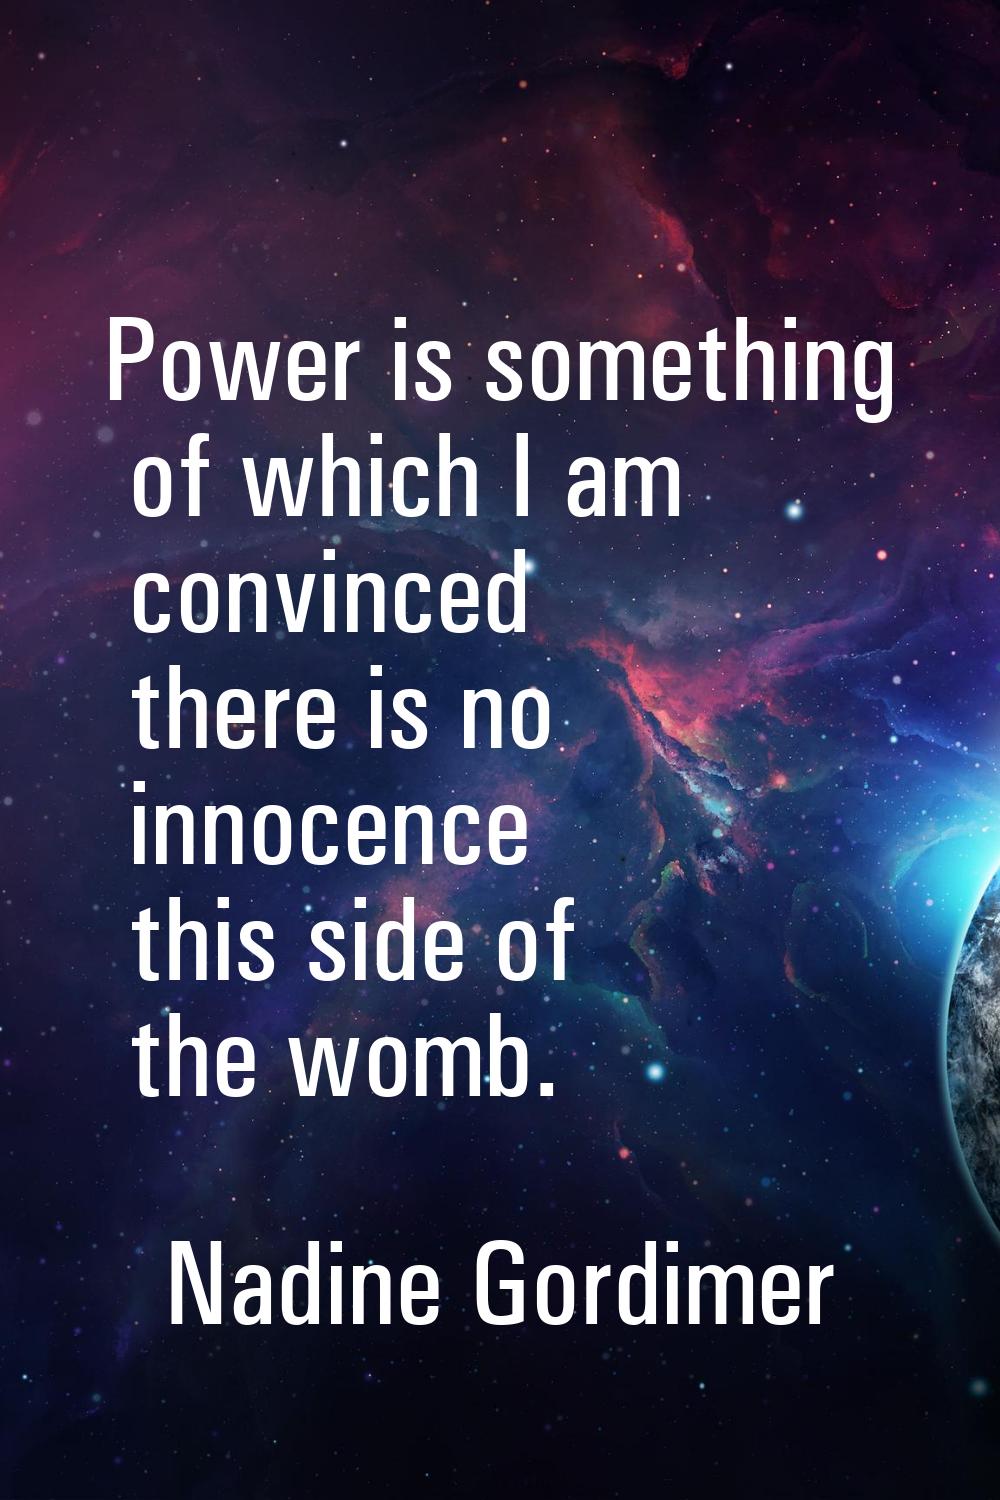 Power is something of which I am convinced there is no innocence this side of the womb.